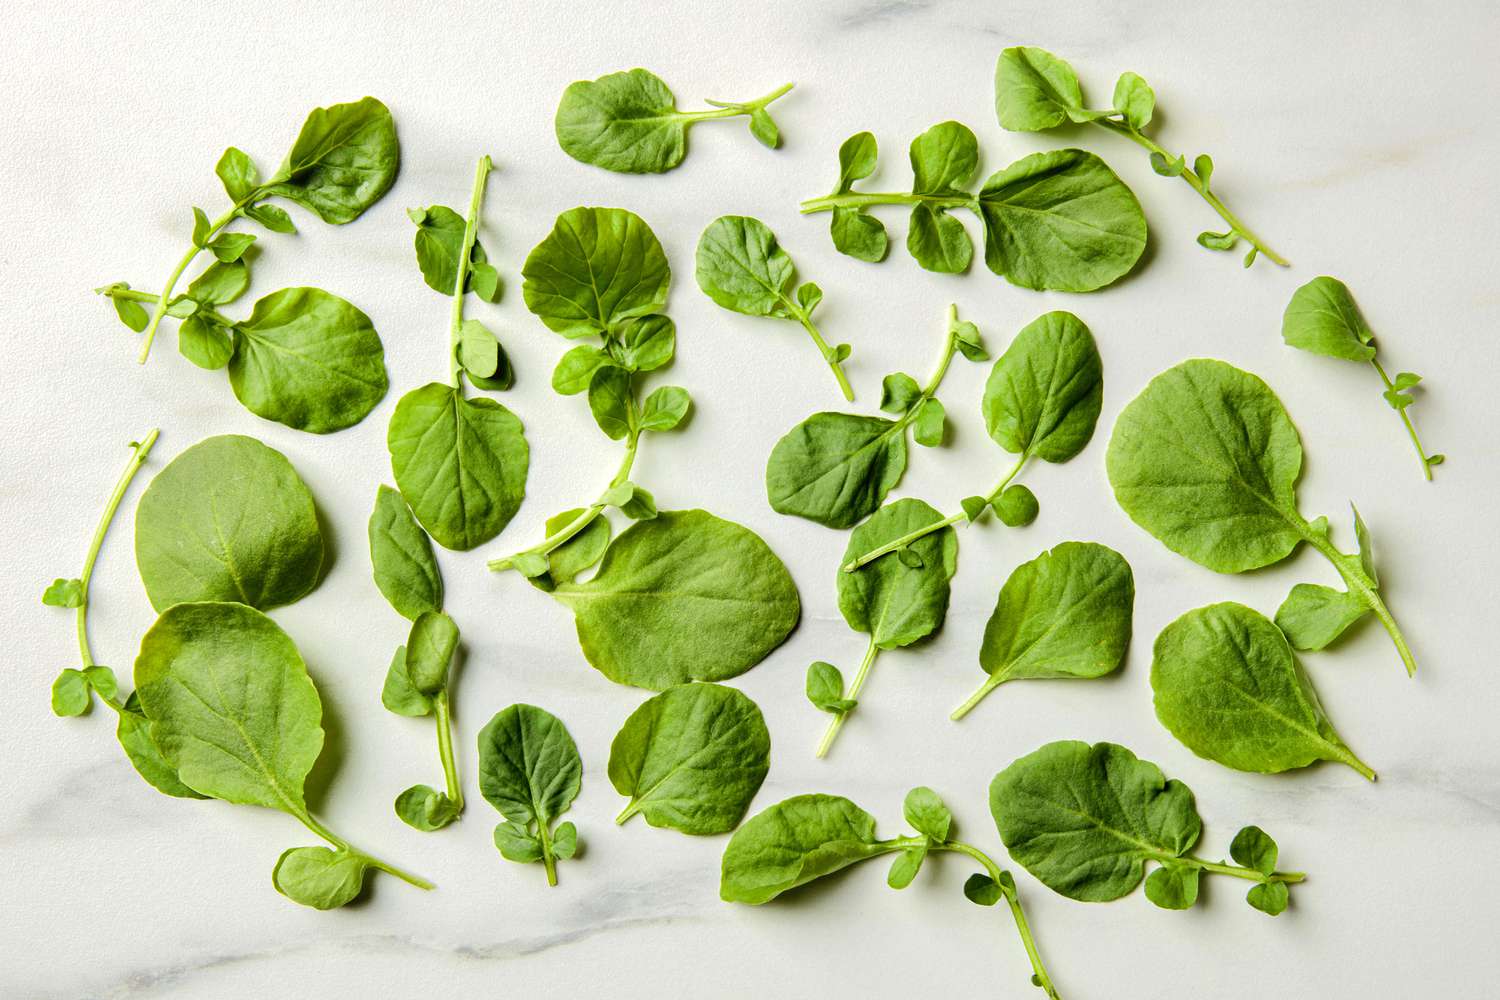 Watercress leaves scattered on a marble surface